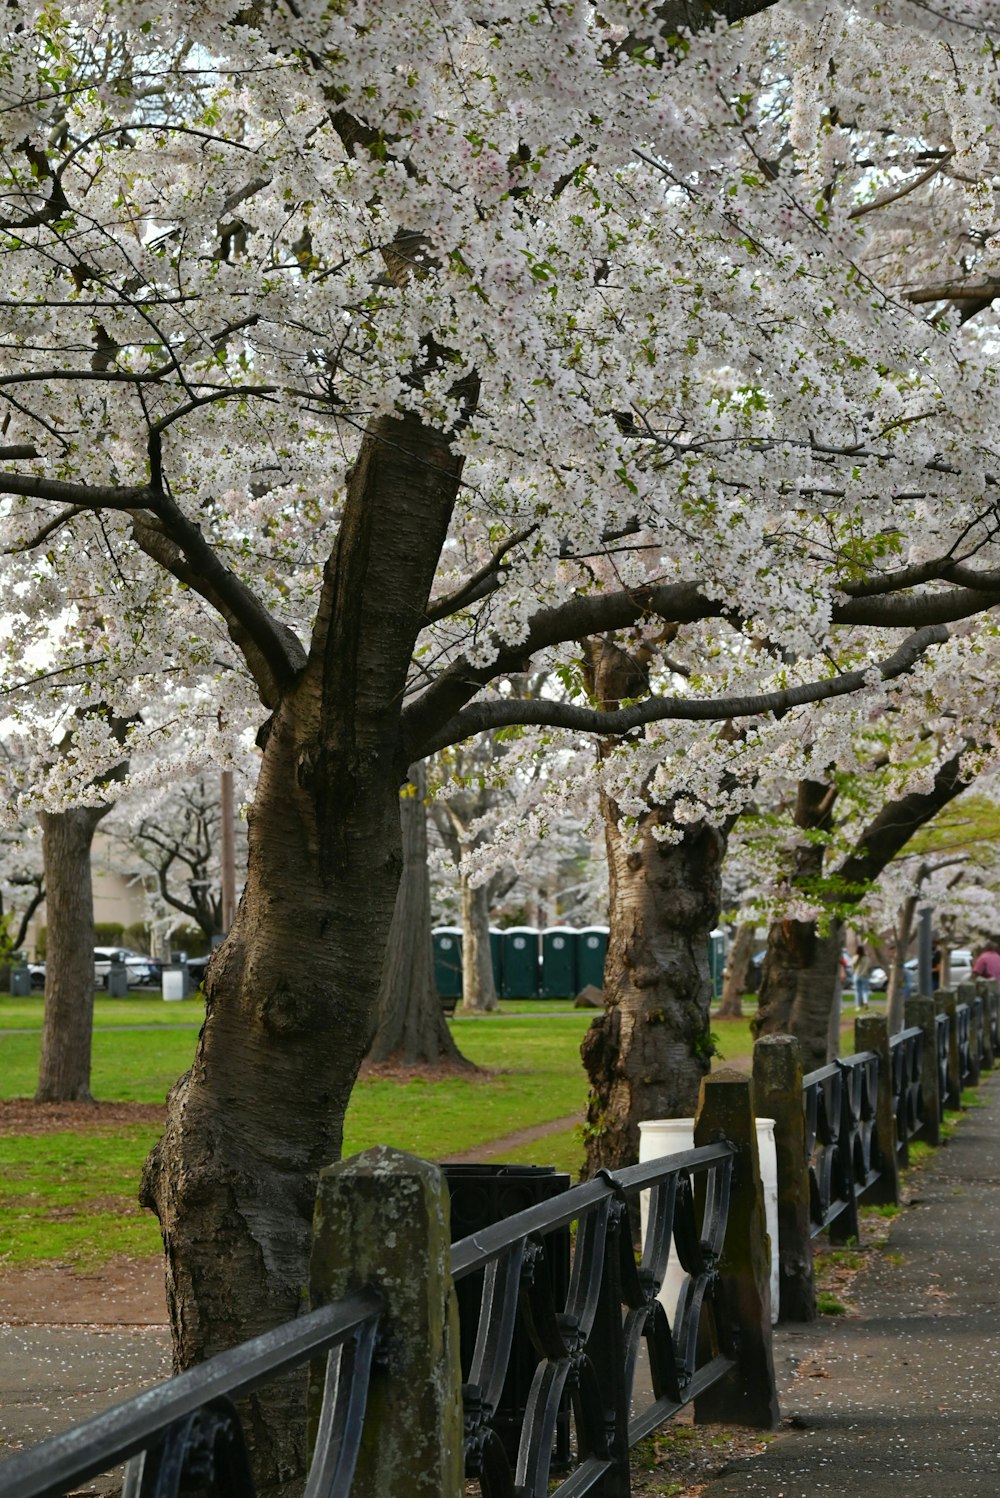 a park bench under a blooming cherry tree